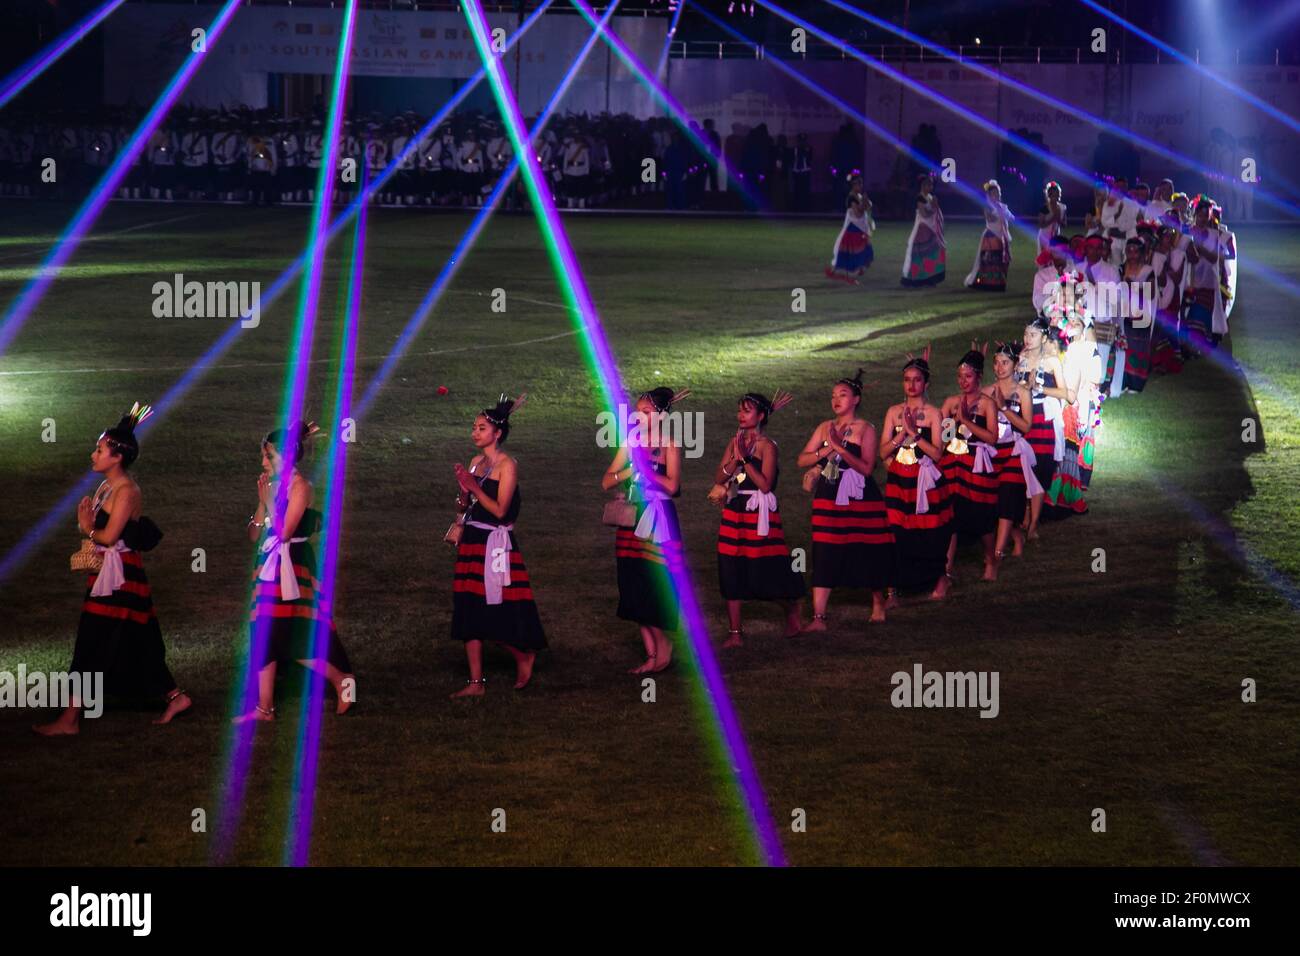 Dancers perform during the opening ceremony of the 13th South Asian Games (SAG) in Kathmandu, Nepal. 01 December 2019. At present, SAG 2019 are joined by seven members namely Bangladesh, Bhutan, India, the Maldives, Nepal, Pakistan, and Sri Lanka. SAG 2019 is being hosted by Nepal and games will be played in Kathmandu and Pokhara from December 1, 2019 to December 10, 2019. 27 games are being played in the 2019 iteration of South Asian Games.. (Photo by Prabin Ranabhat/Pacific Press/Sipa USA) Stock Photo